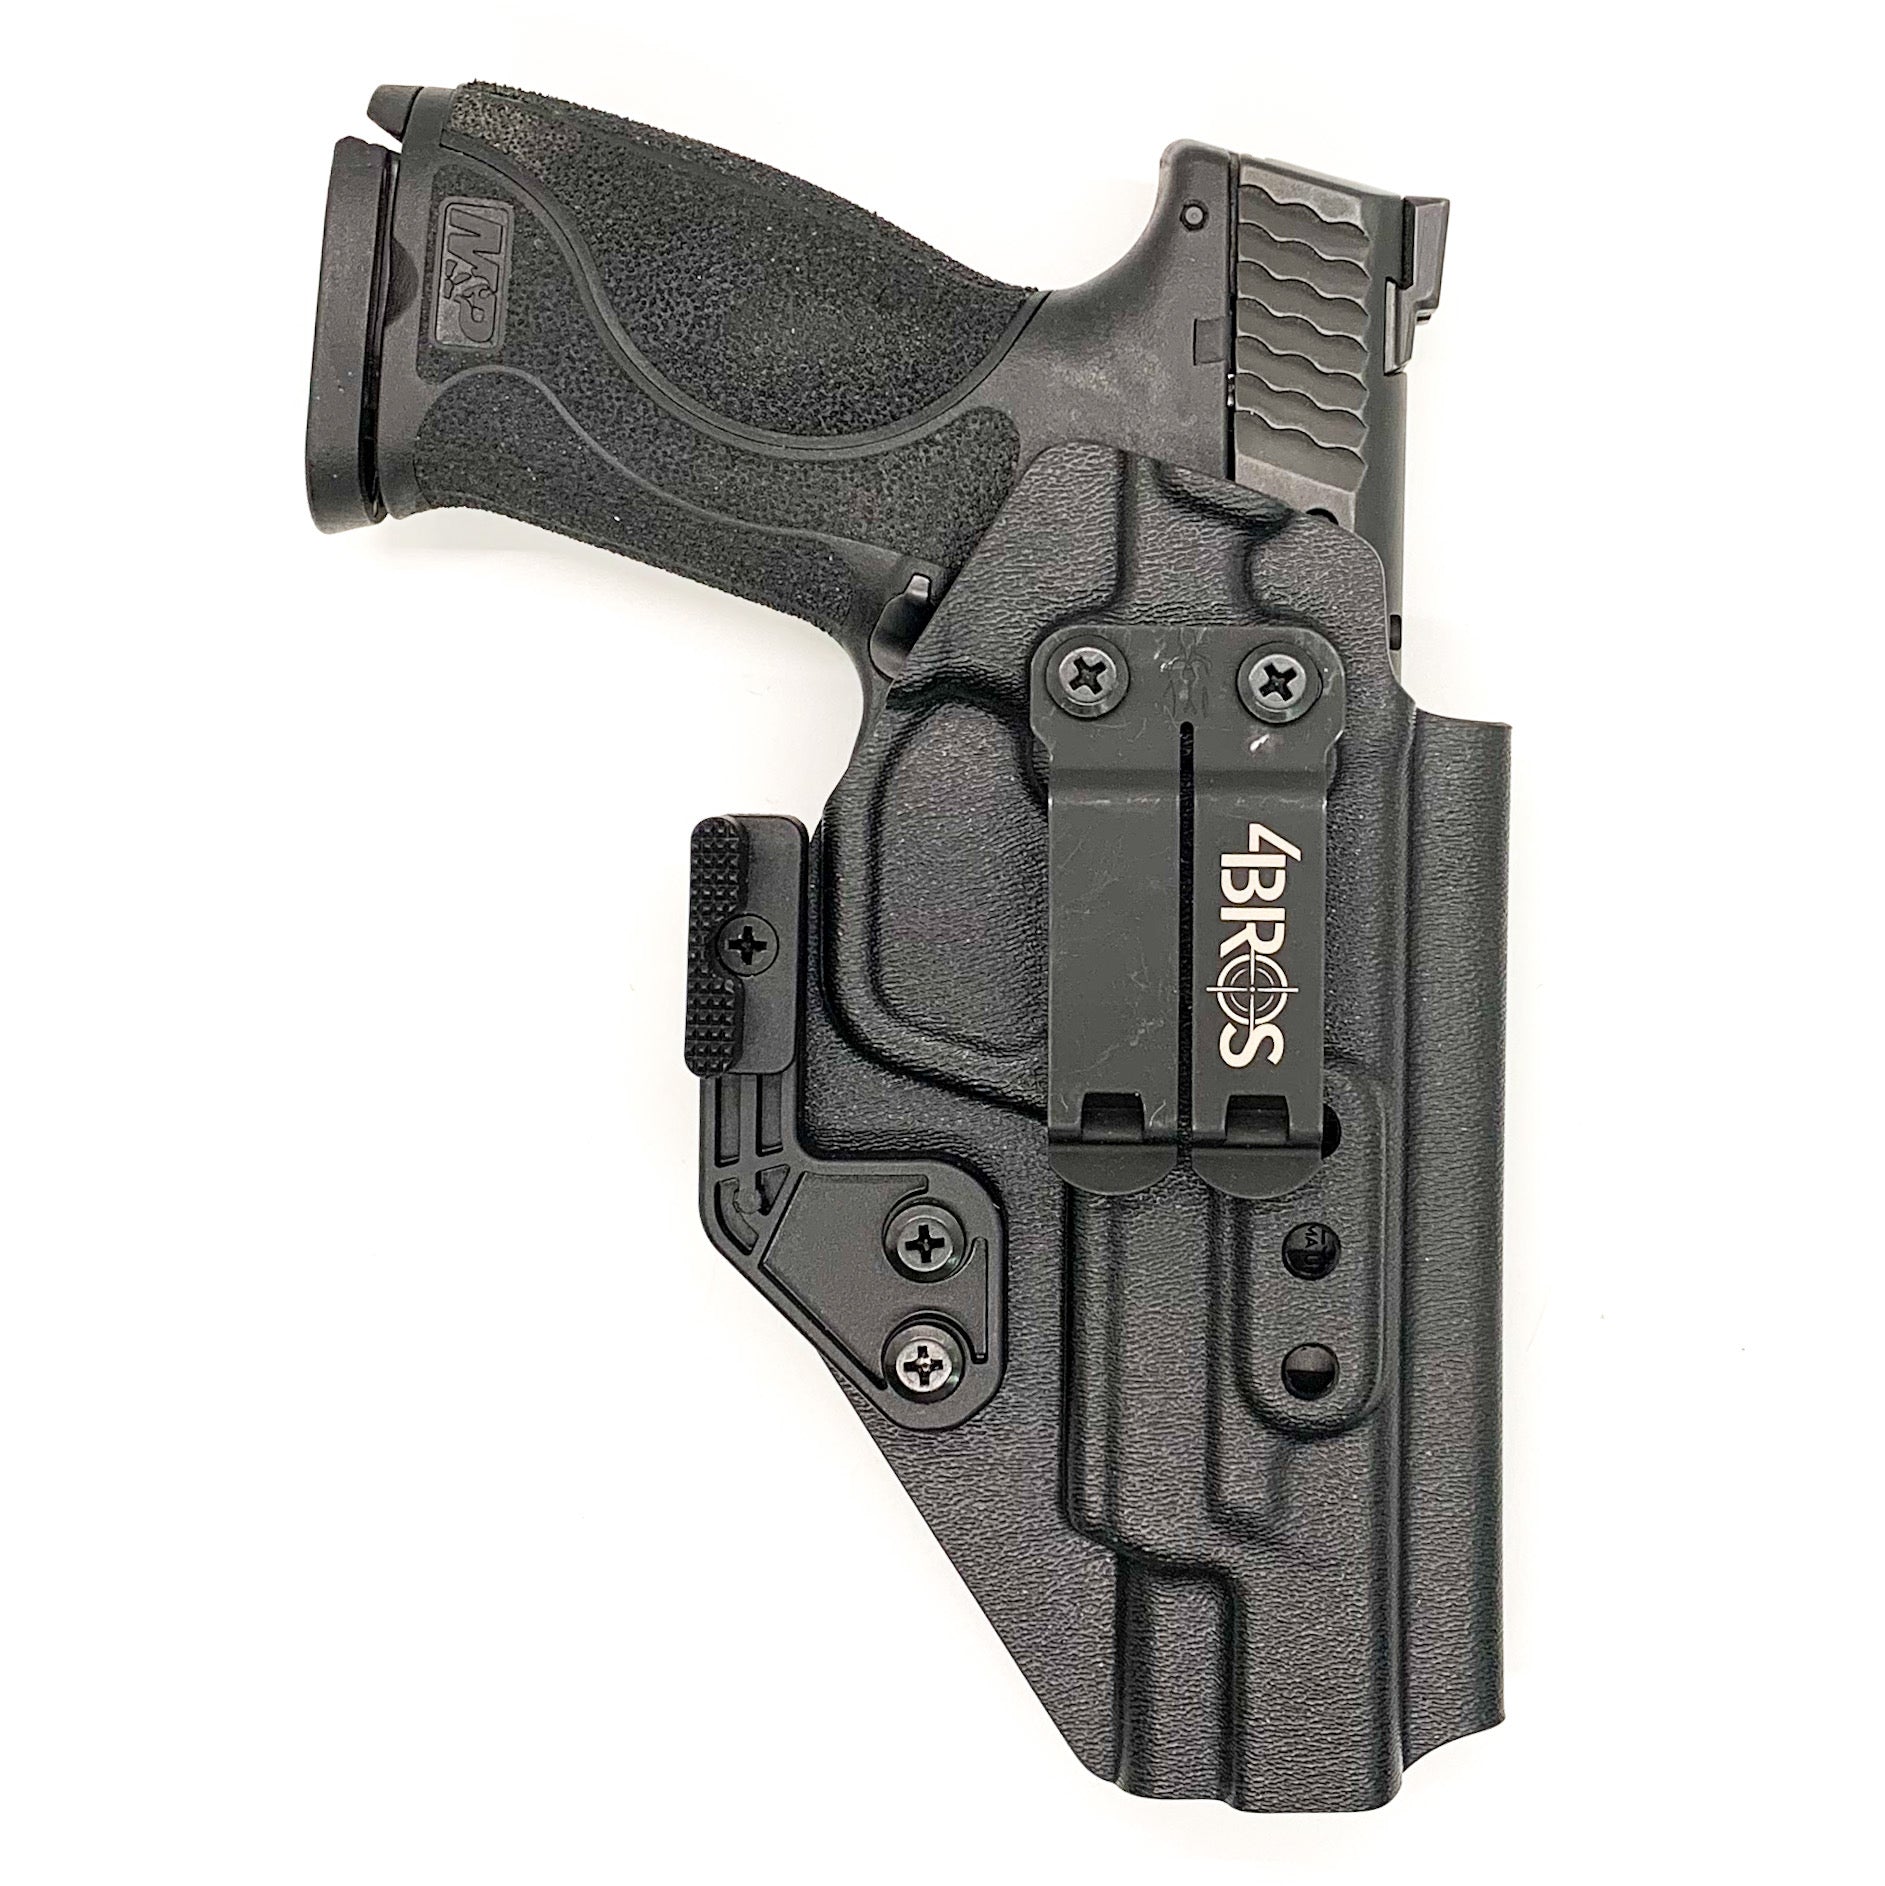 Inside Waistband Kydex Taco Holster designed to fit the Smith and Wesson M&P 10MM M2.0 pistol with thumb safety. The holster is designed to fit both the 4.6" & 4.25" barrel lengths.  Full sweat guard, adjustable retention, profiled for a red dot sight. Proudly made in the USA for veterans and law enforcement. 